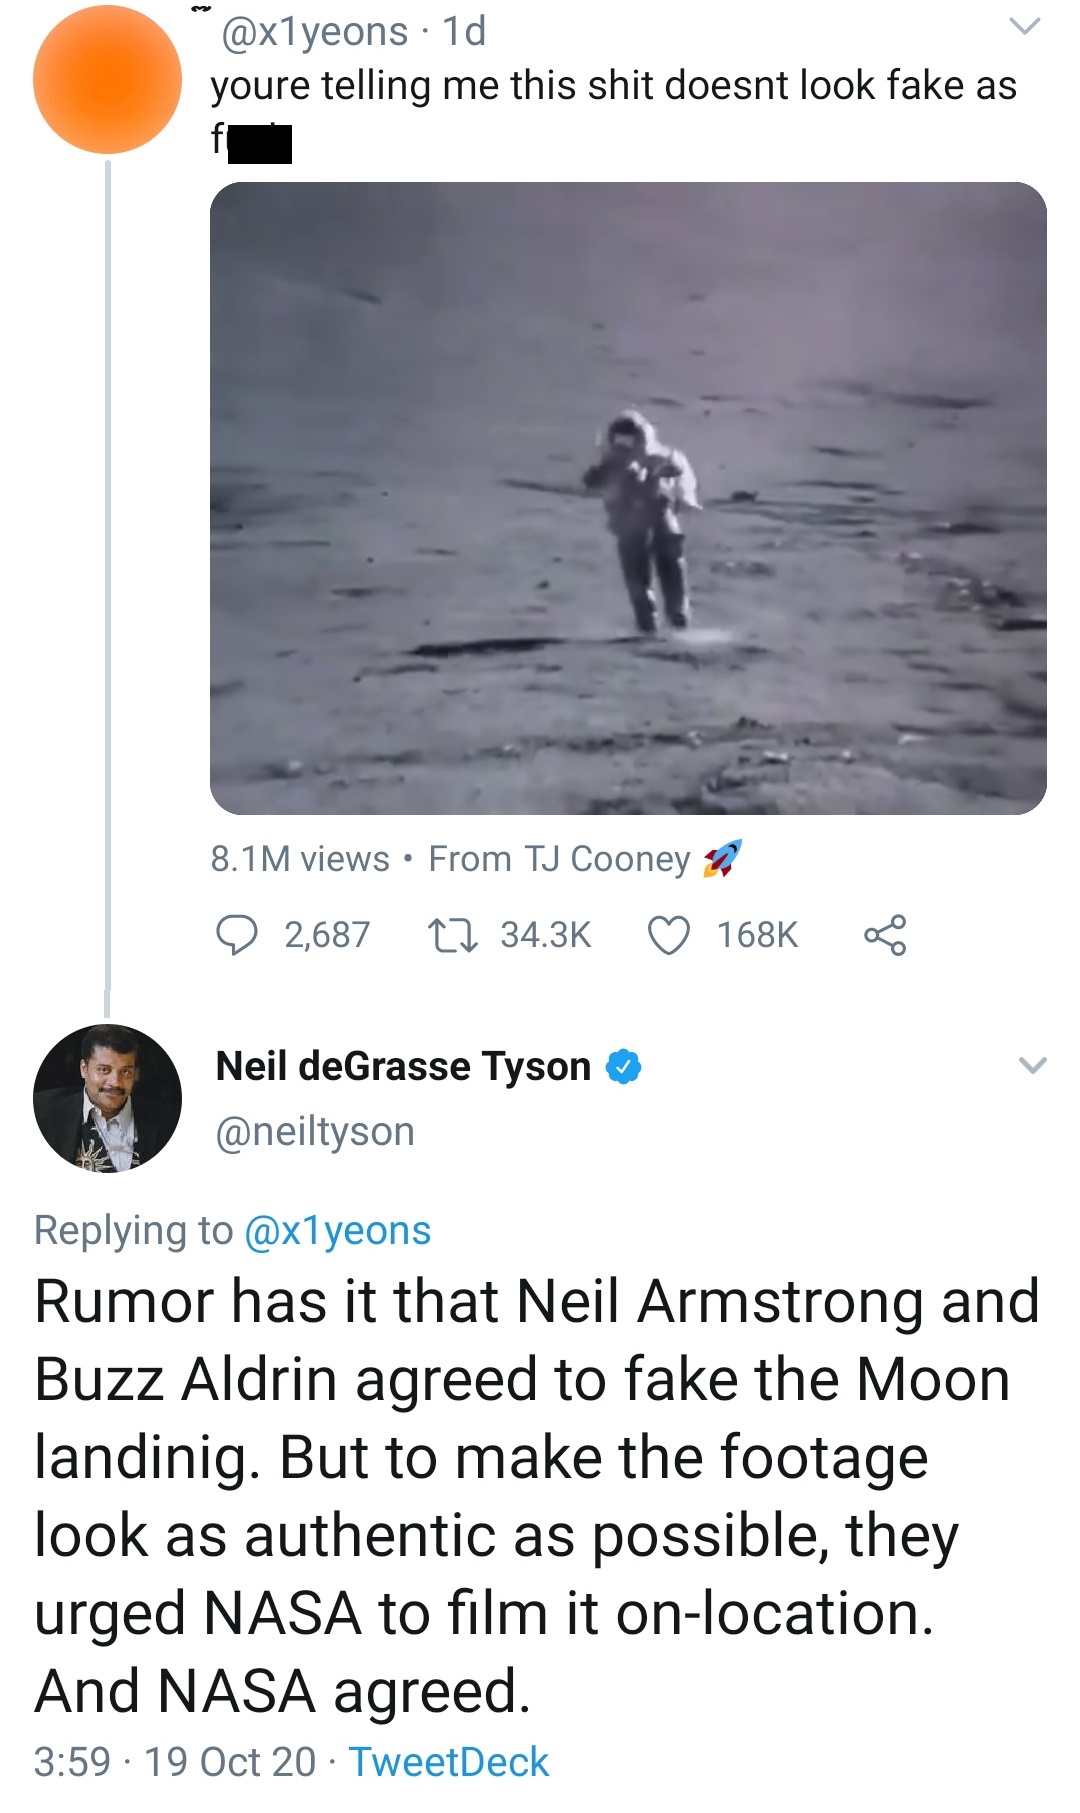 water - 1d youre telling me this shit doesnt look fake as 8.1 M views From Tj Cooney 9 2,687 17 8 Neil deGrasse Tyson Rumor has it that Neil Armstrong and Buzz Aldrin agreed to fake the Moon landinig. But to make the footage look as authentic as possible,